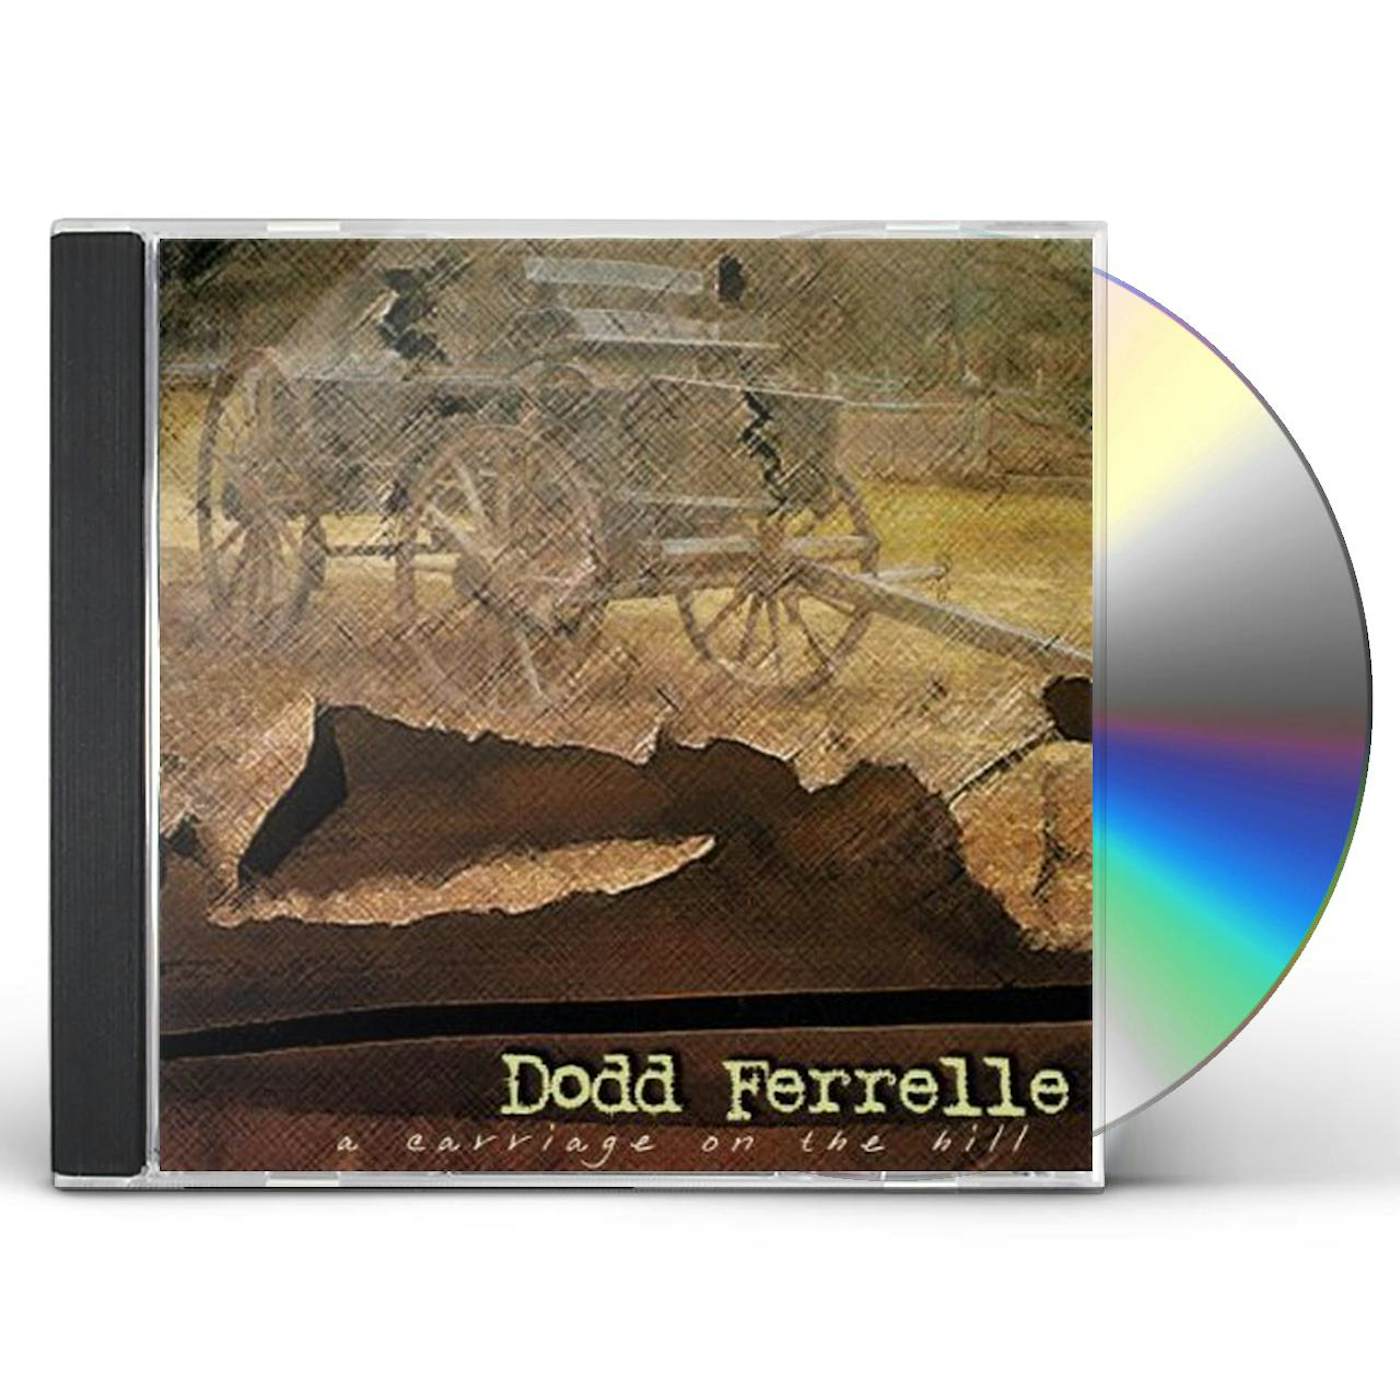 Dodd Ferrelle CARRIAGE ON THE HILL CD